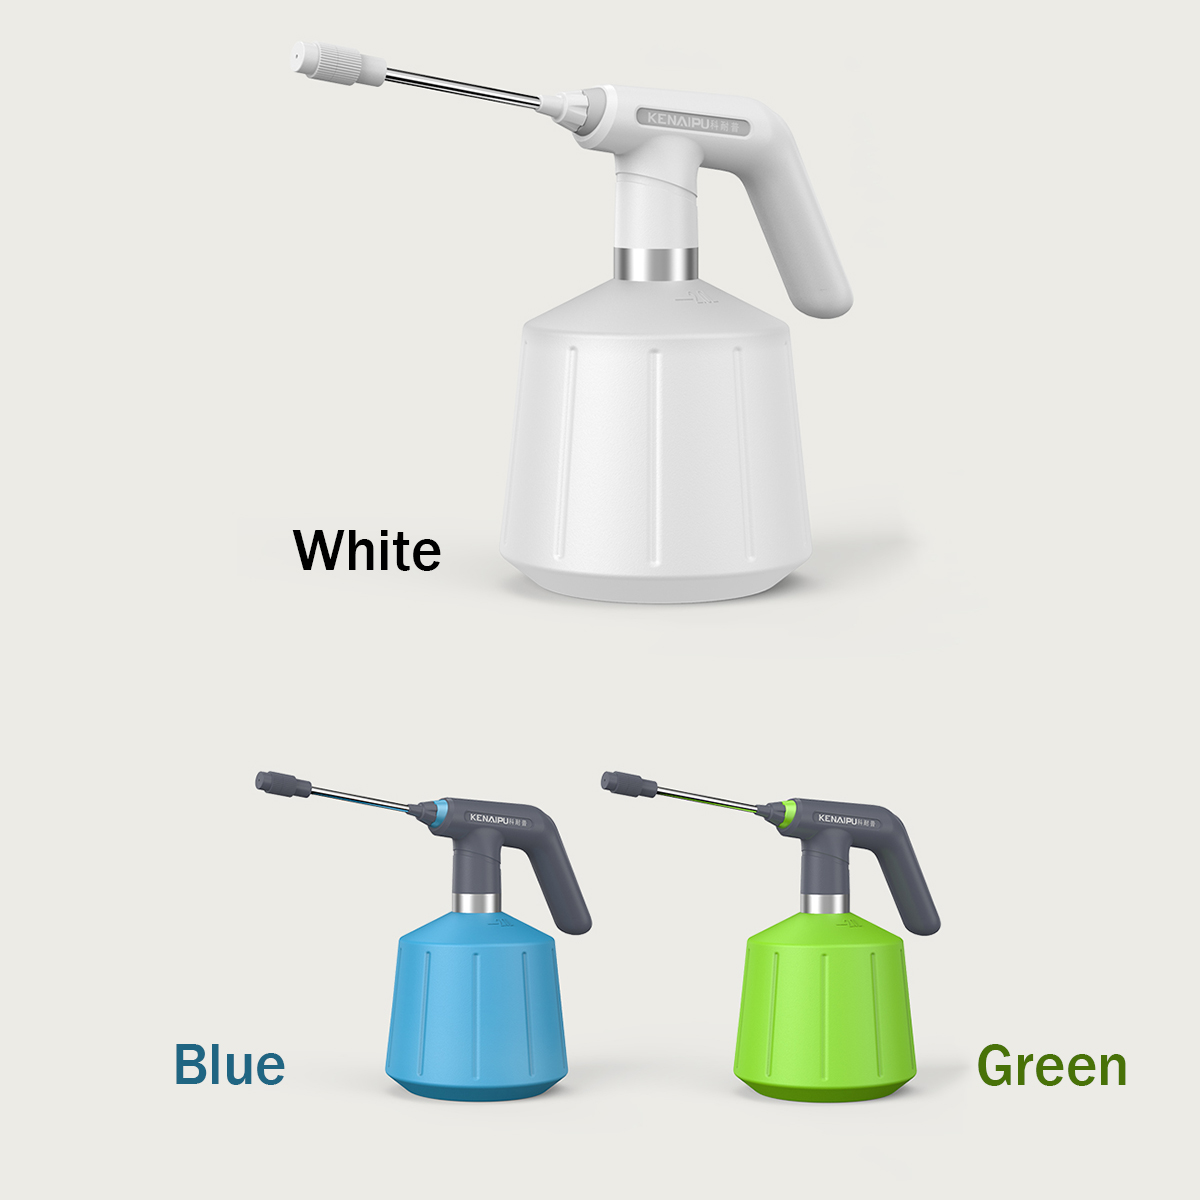 15L2L25L-Electric-Disinfection-Watering-Can-Spray-Bottle-USB-Rechargeable-Spray-Guns-1901189-11